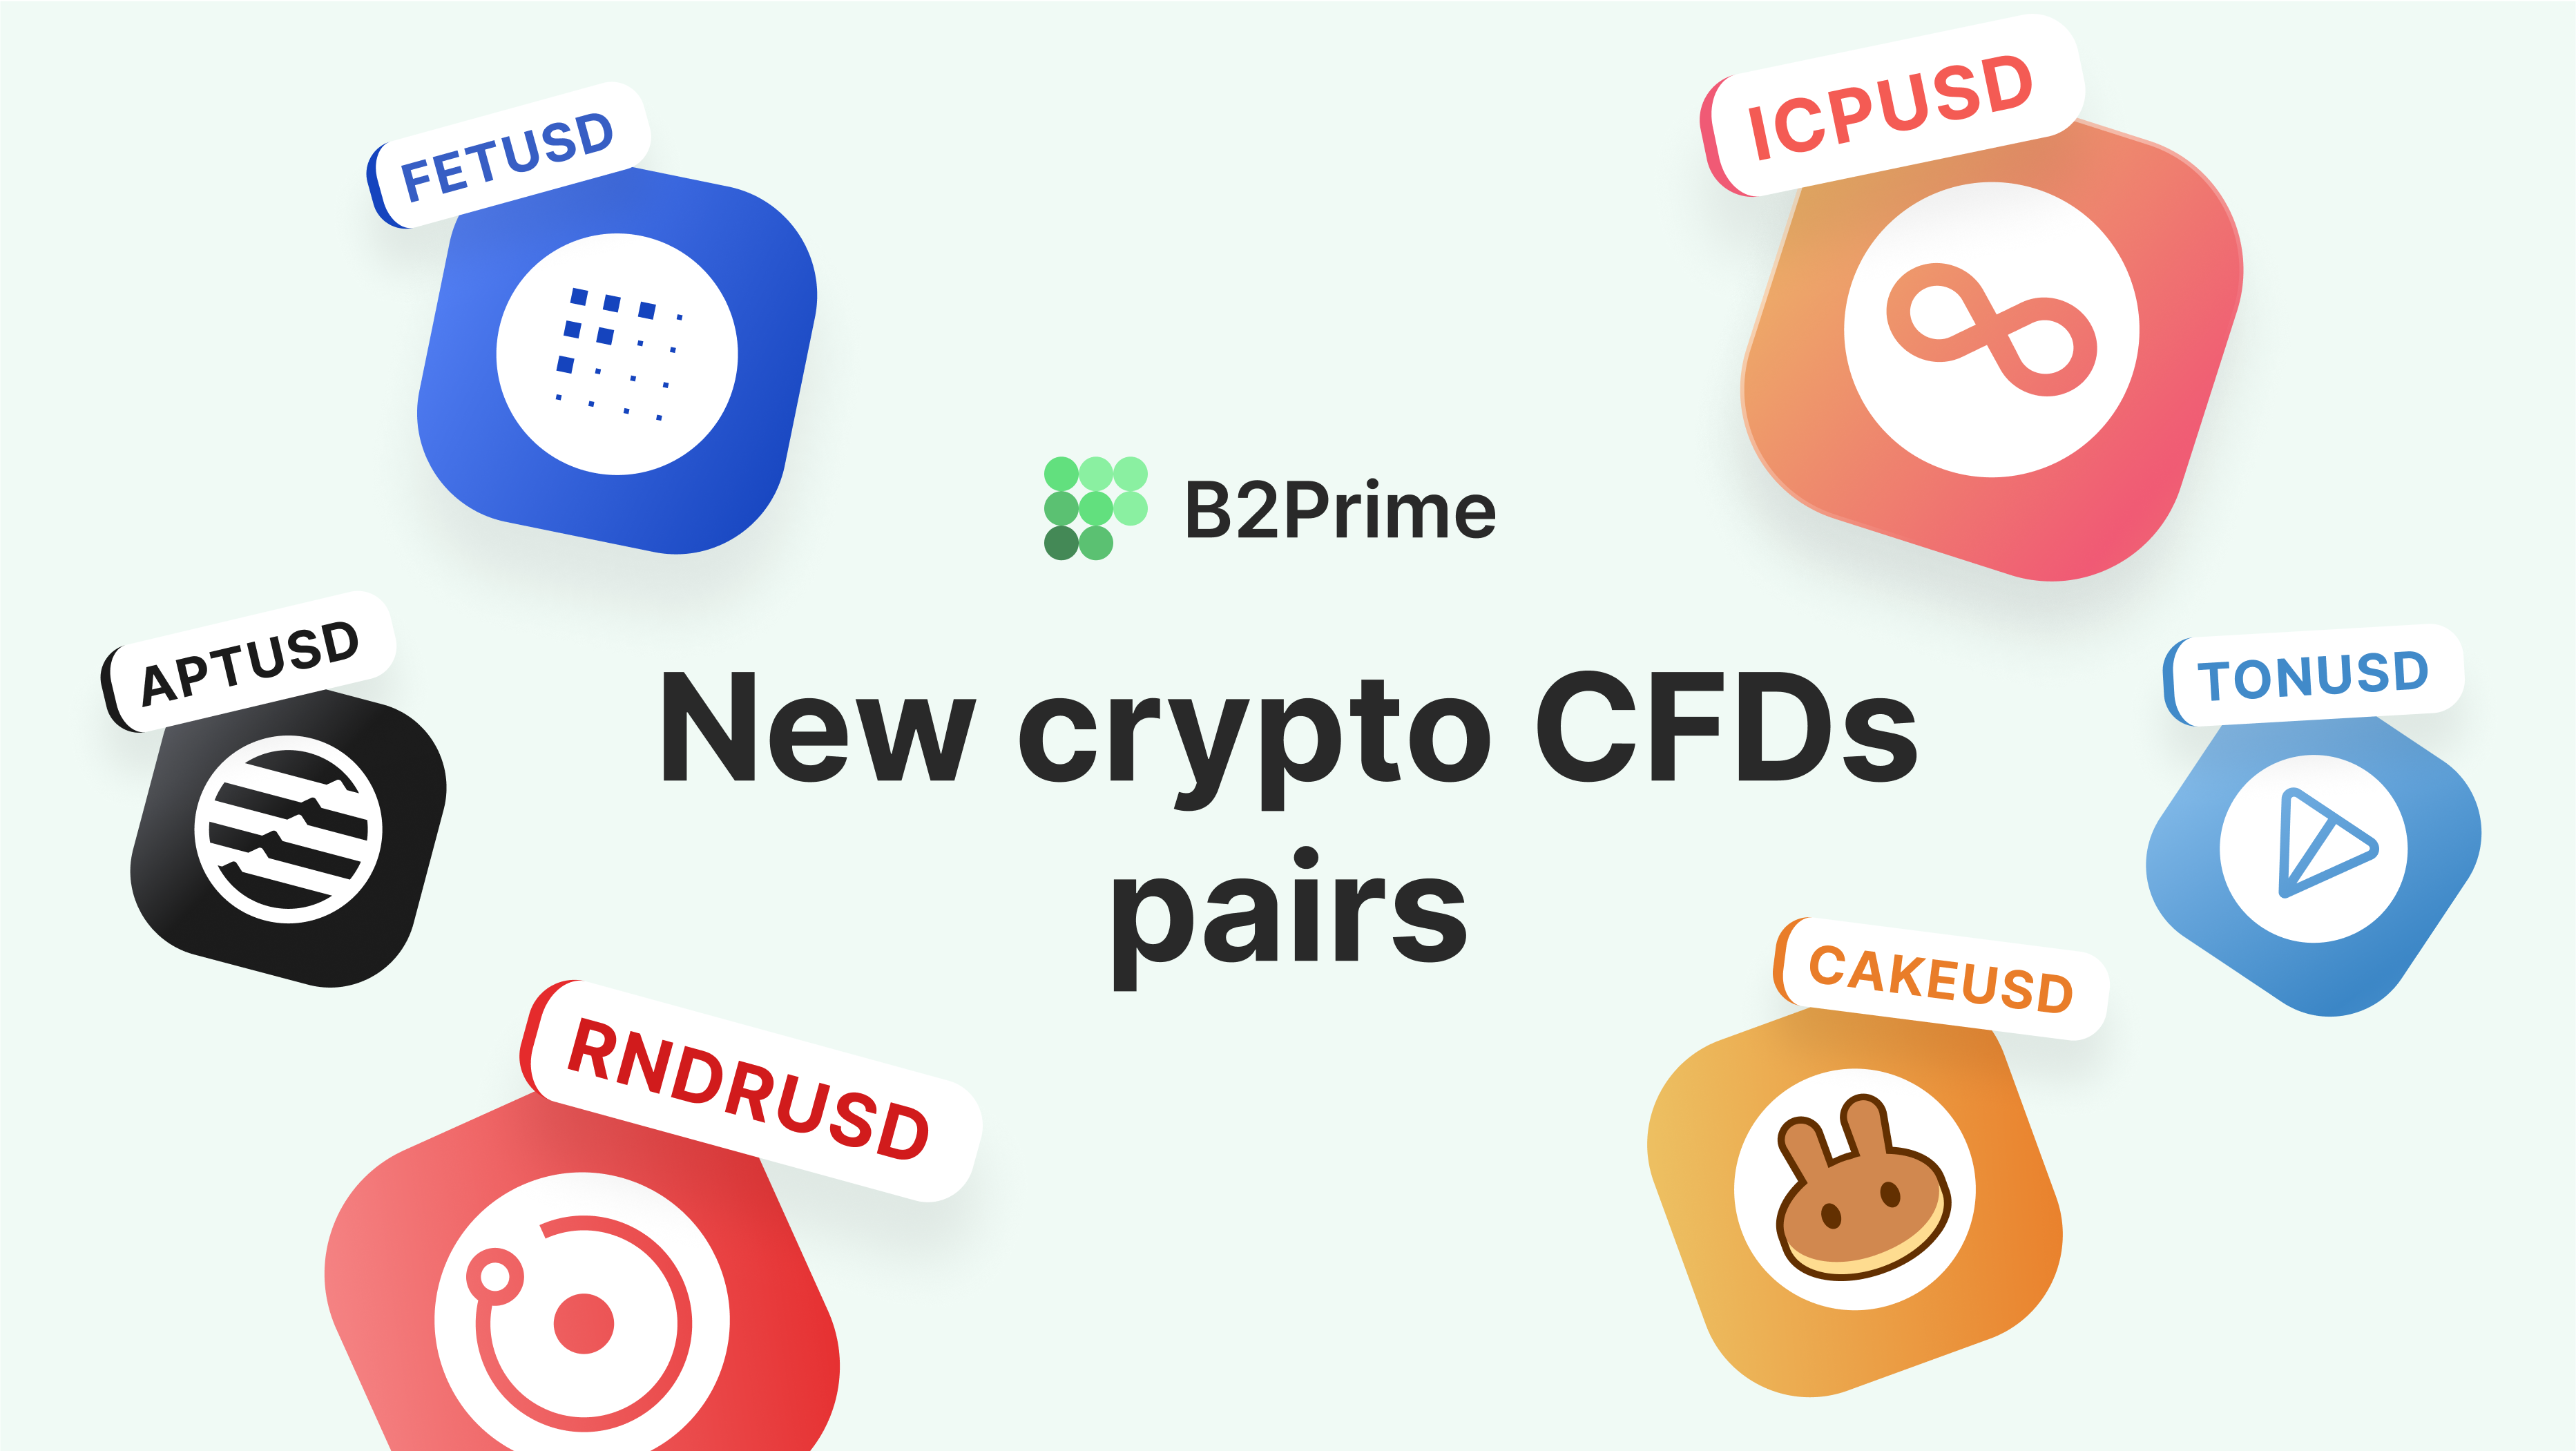 B2Prime adds 6 new crypto CFDs pairs